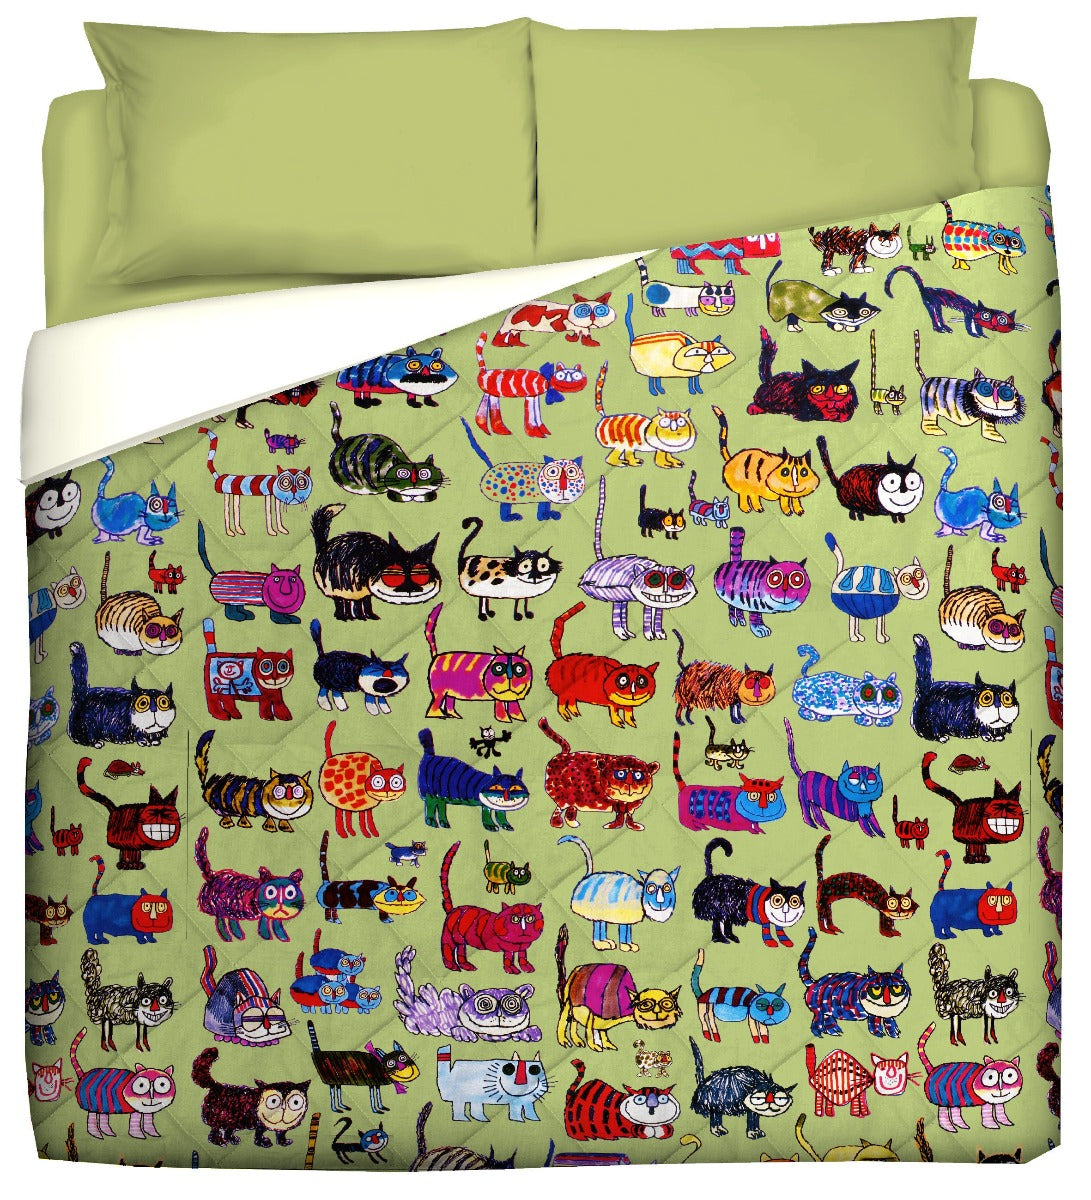 Winter Quilt - Funny Bed - Cats Matti